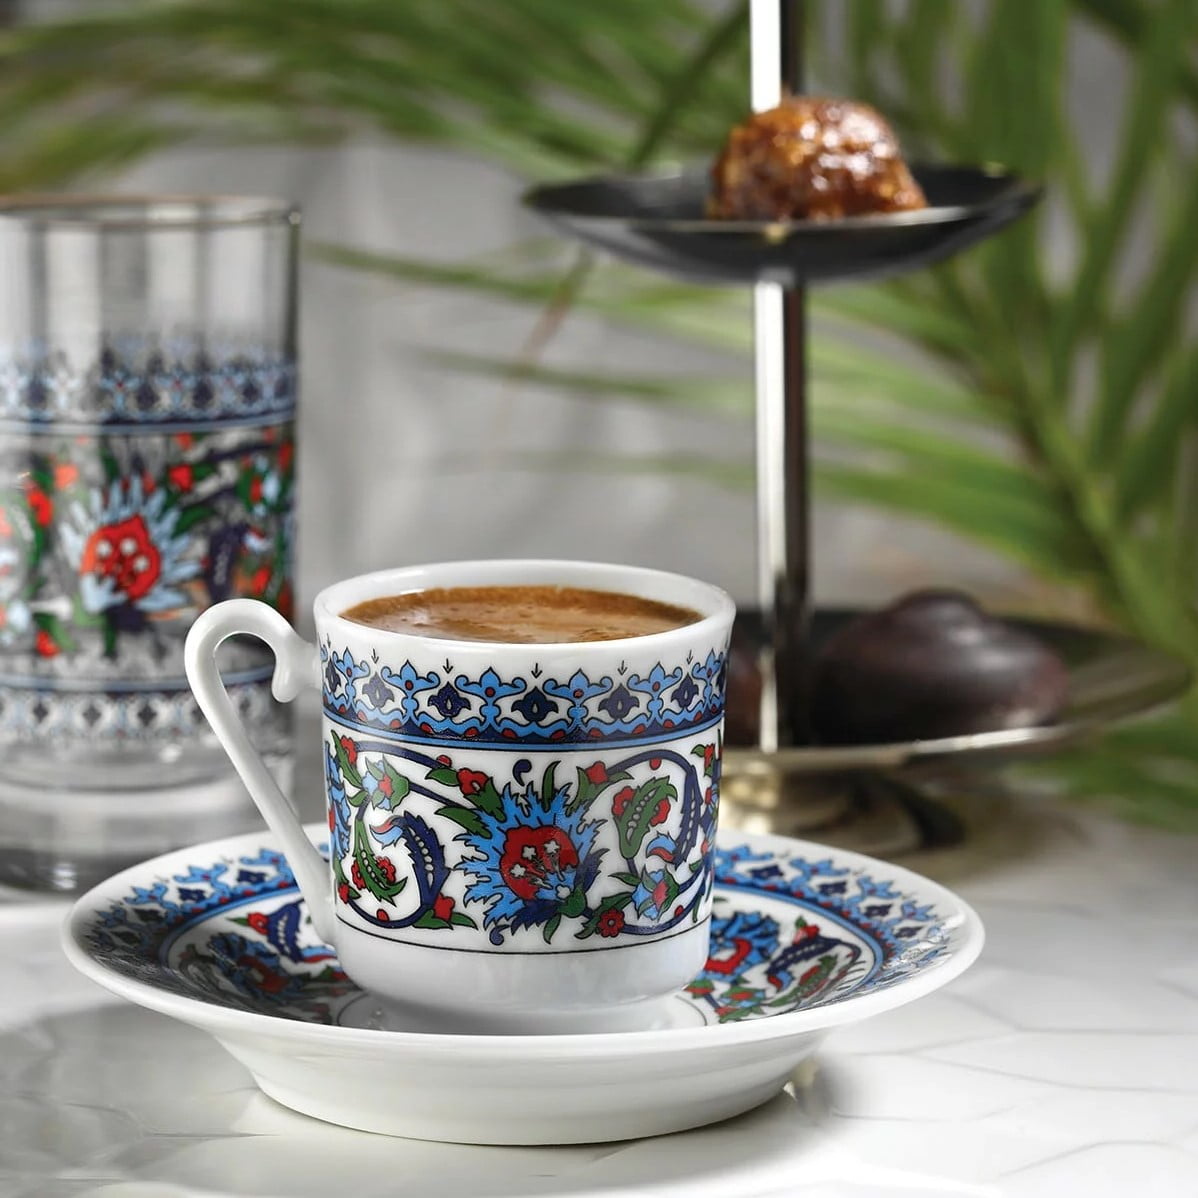 Espresso Set 80 ml Small Espresso Cups and Saucers 2.7 OZ Black Small Coffee Cups Turkish Coffee Cups Set of 6 Demitasse Cups 